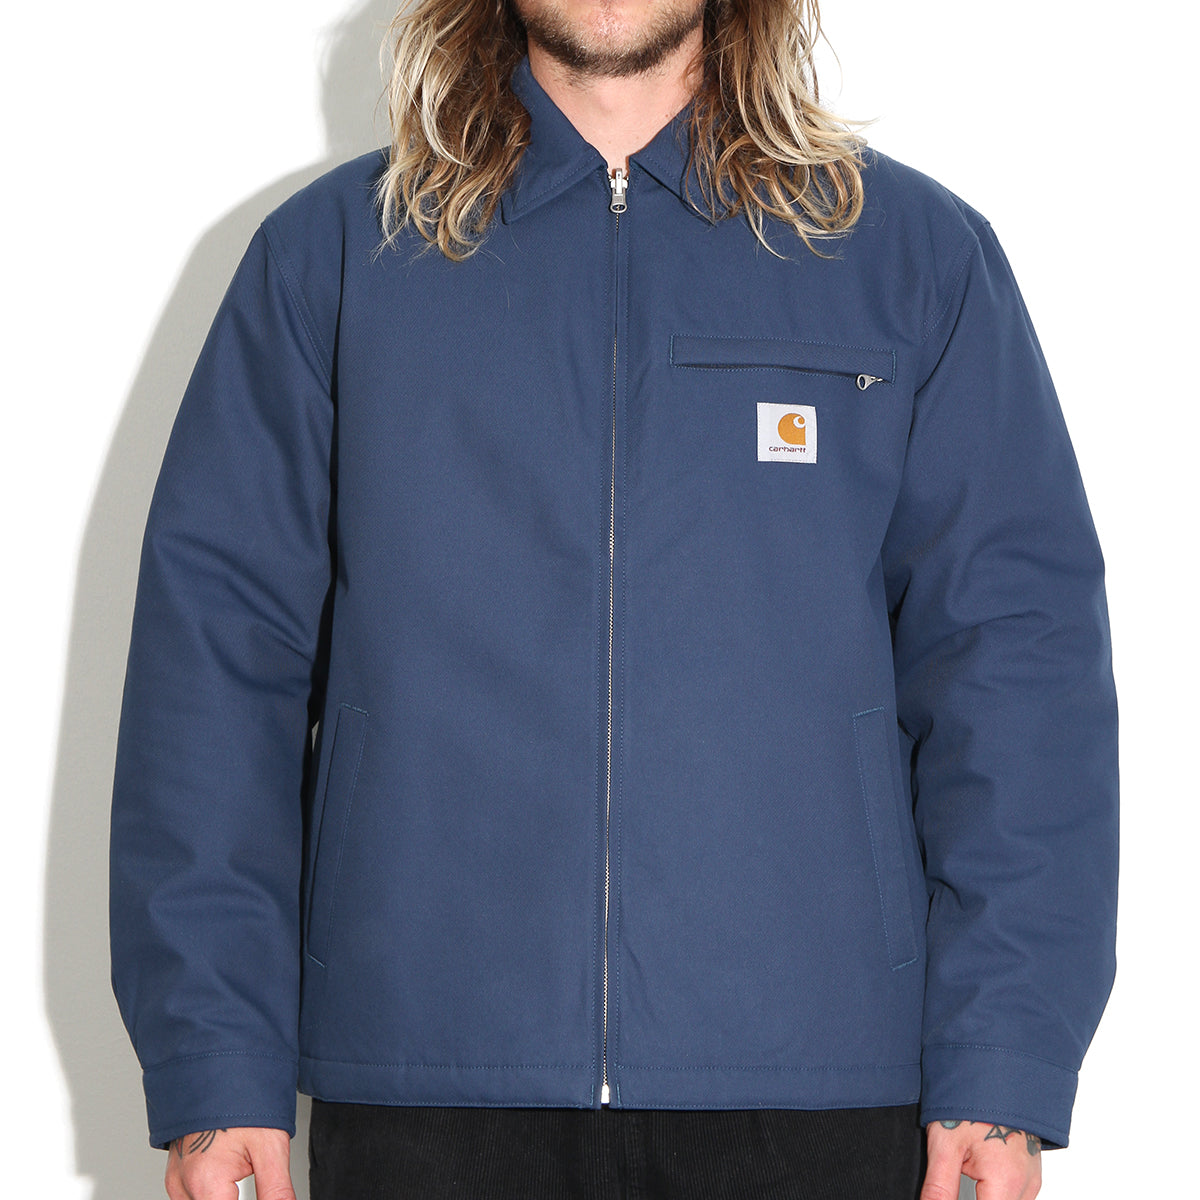 Carhartt WIP | Madera Reversible Jacket Style # I030829-1Q6 Color : Squid / White